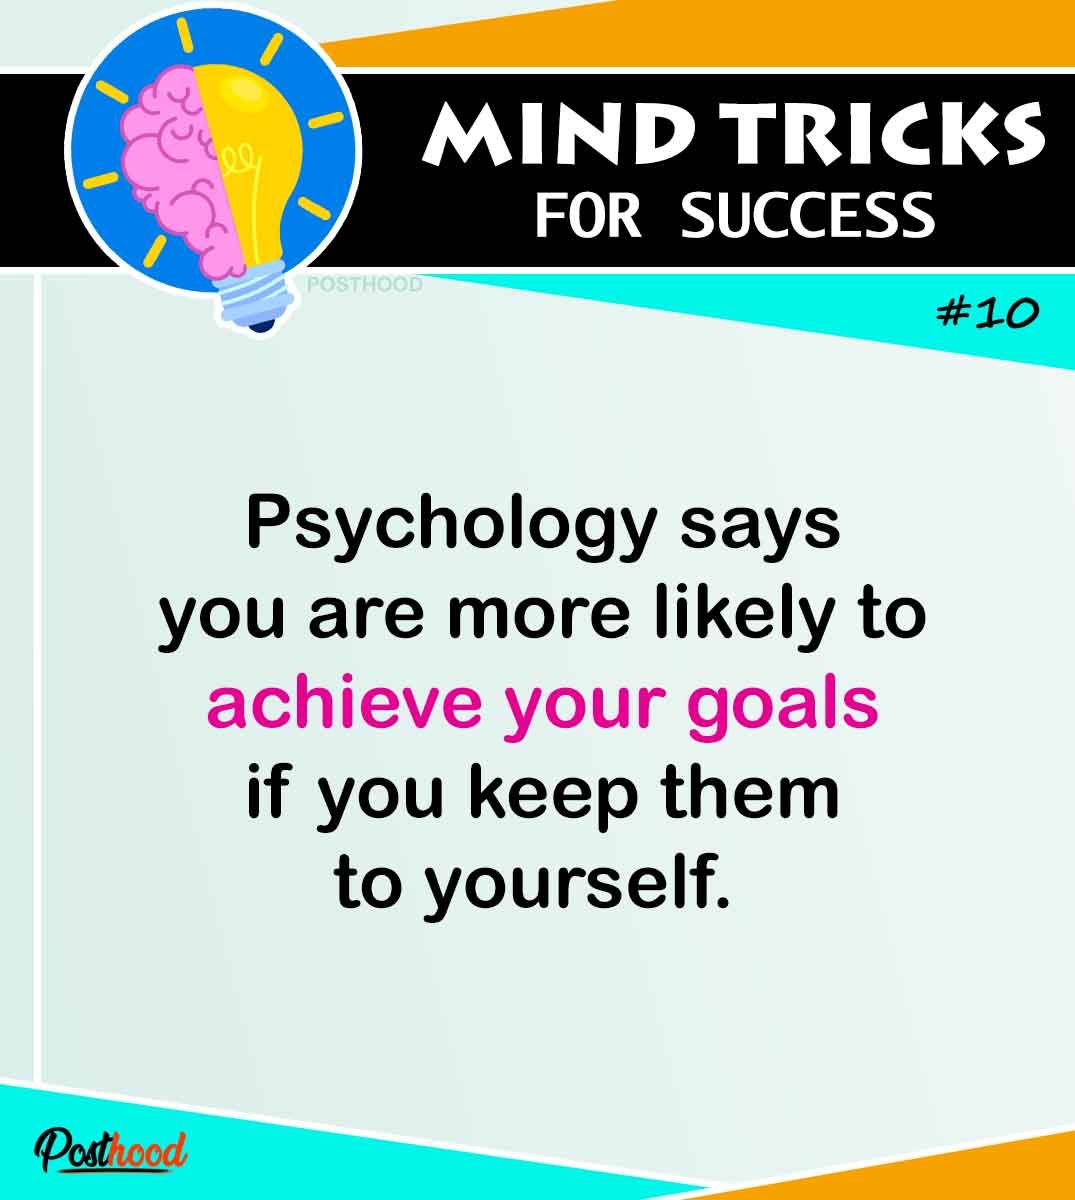 Do you ever trick your mind to get success and achieve desired goals? Get the right mindset by training your mind for success.